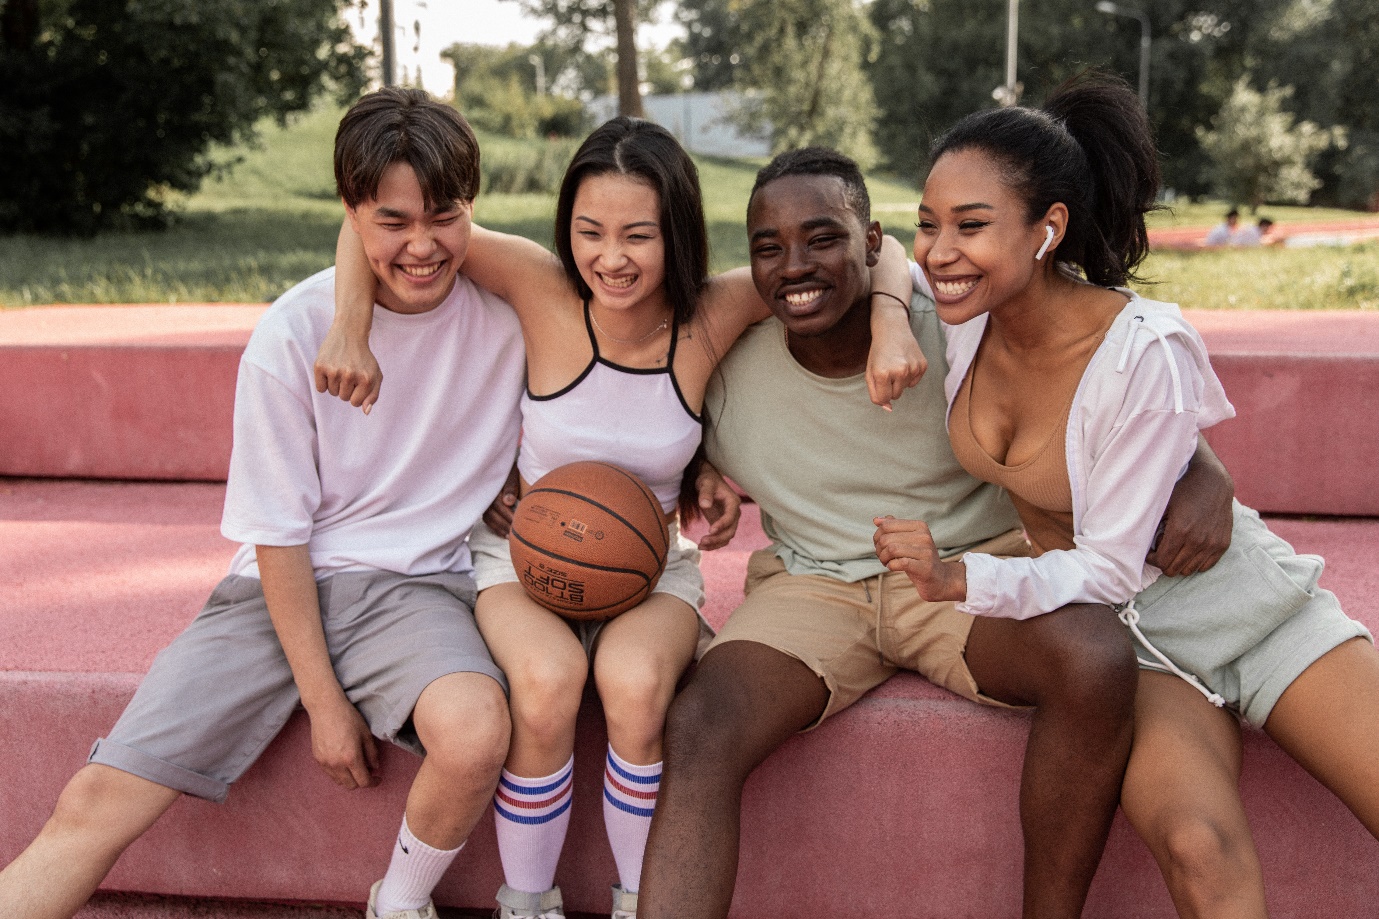 A group of people sitting on a bench with a basketball

Description automatically generated with medium confidence